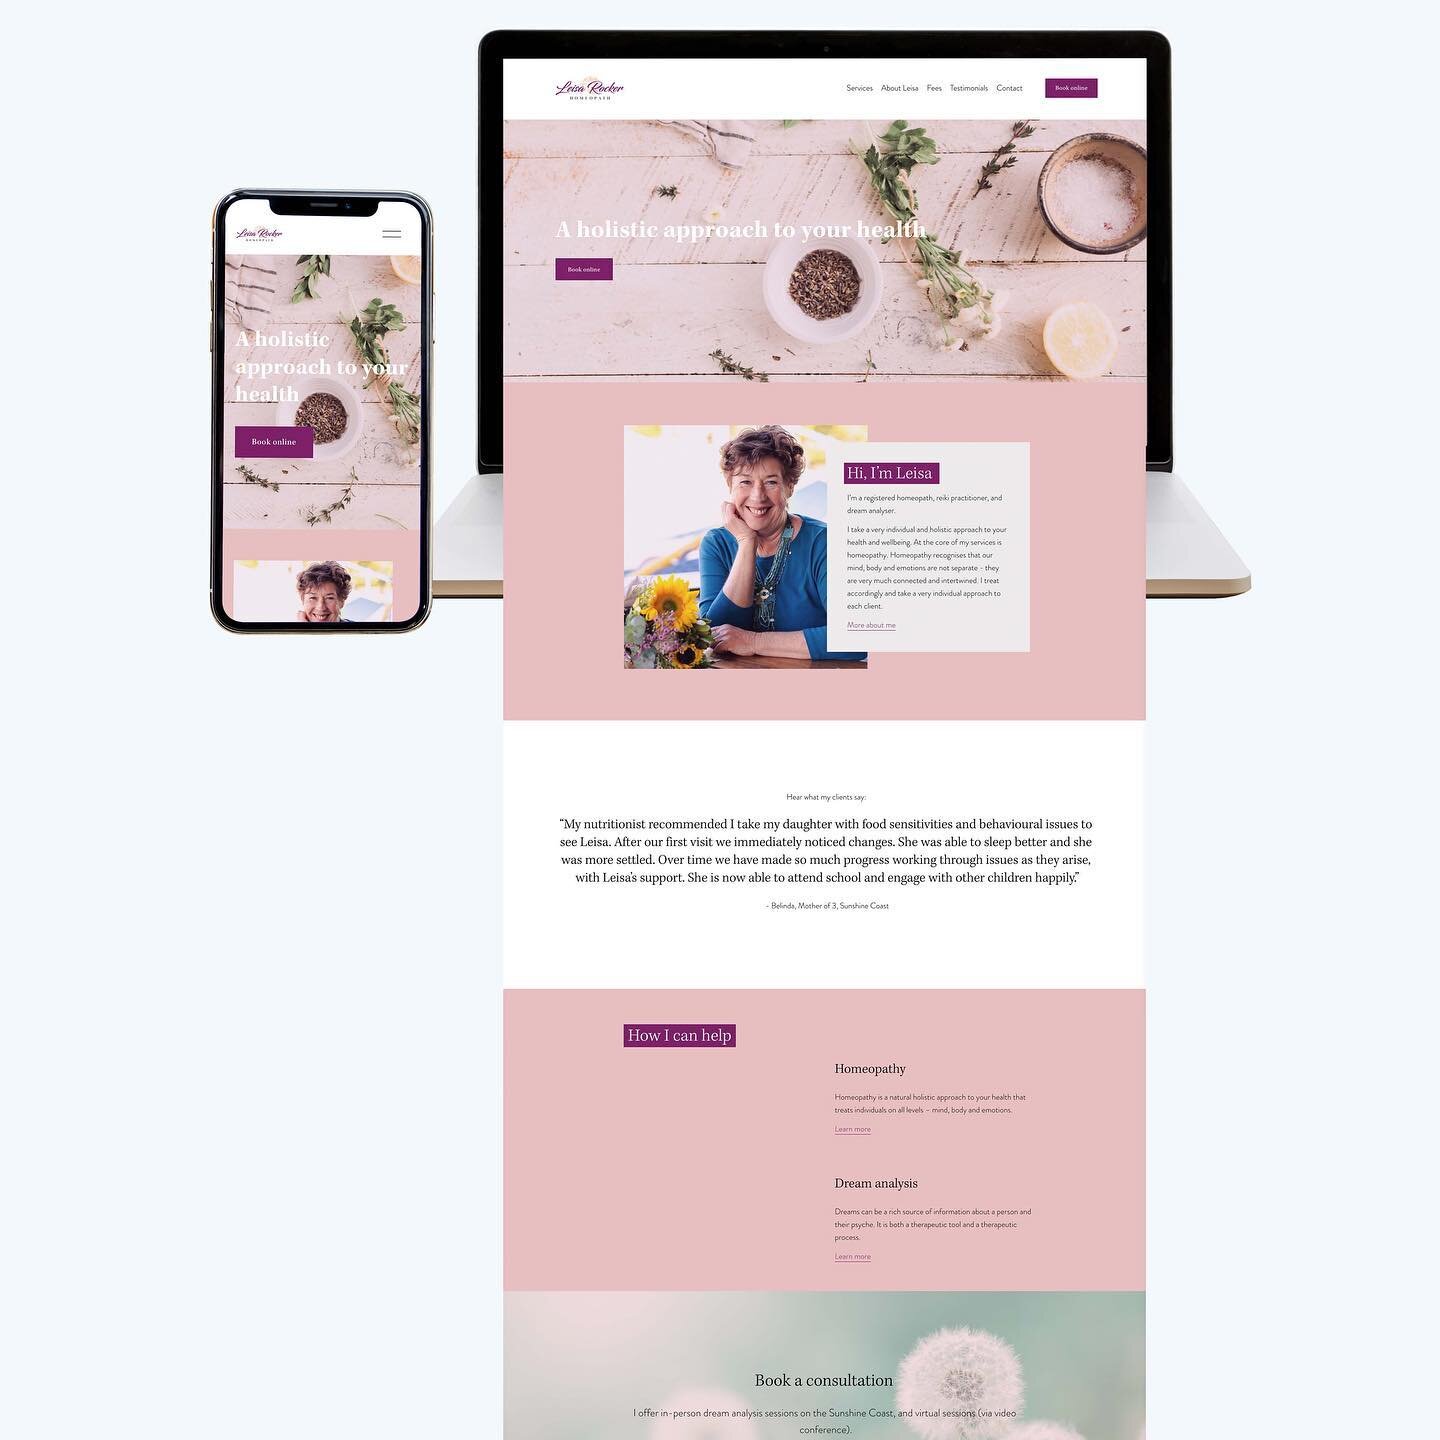 Hot off the press: www.leisarocker.com.au

We had the absolute pleasure of working with homeopath, Leisa Rocker on her new website and are so excited to launch it today 🎉⠀⠀⠀⠀⠀⠀⠀⠀⠀
⠀⠀⠀⠀⠀⠀⠀⠀⠀
This website was built with Search Engine Optimisation as t